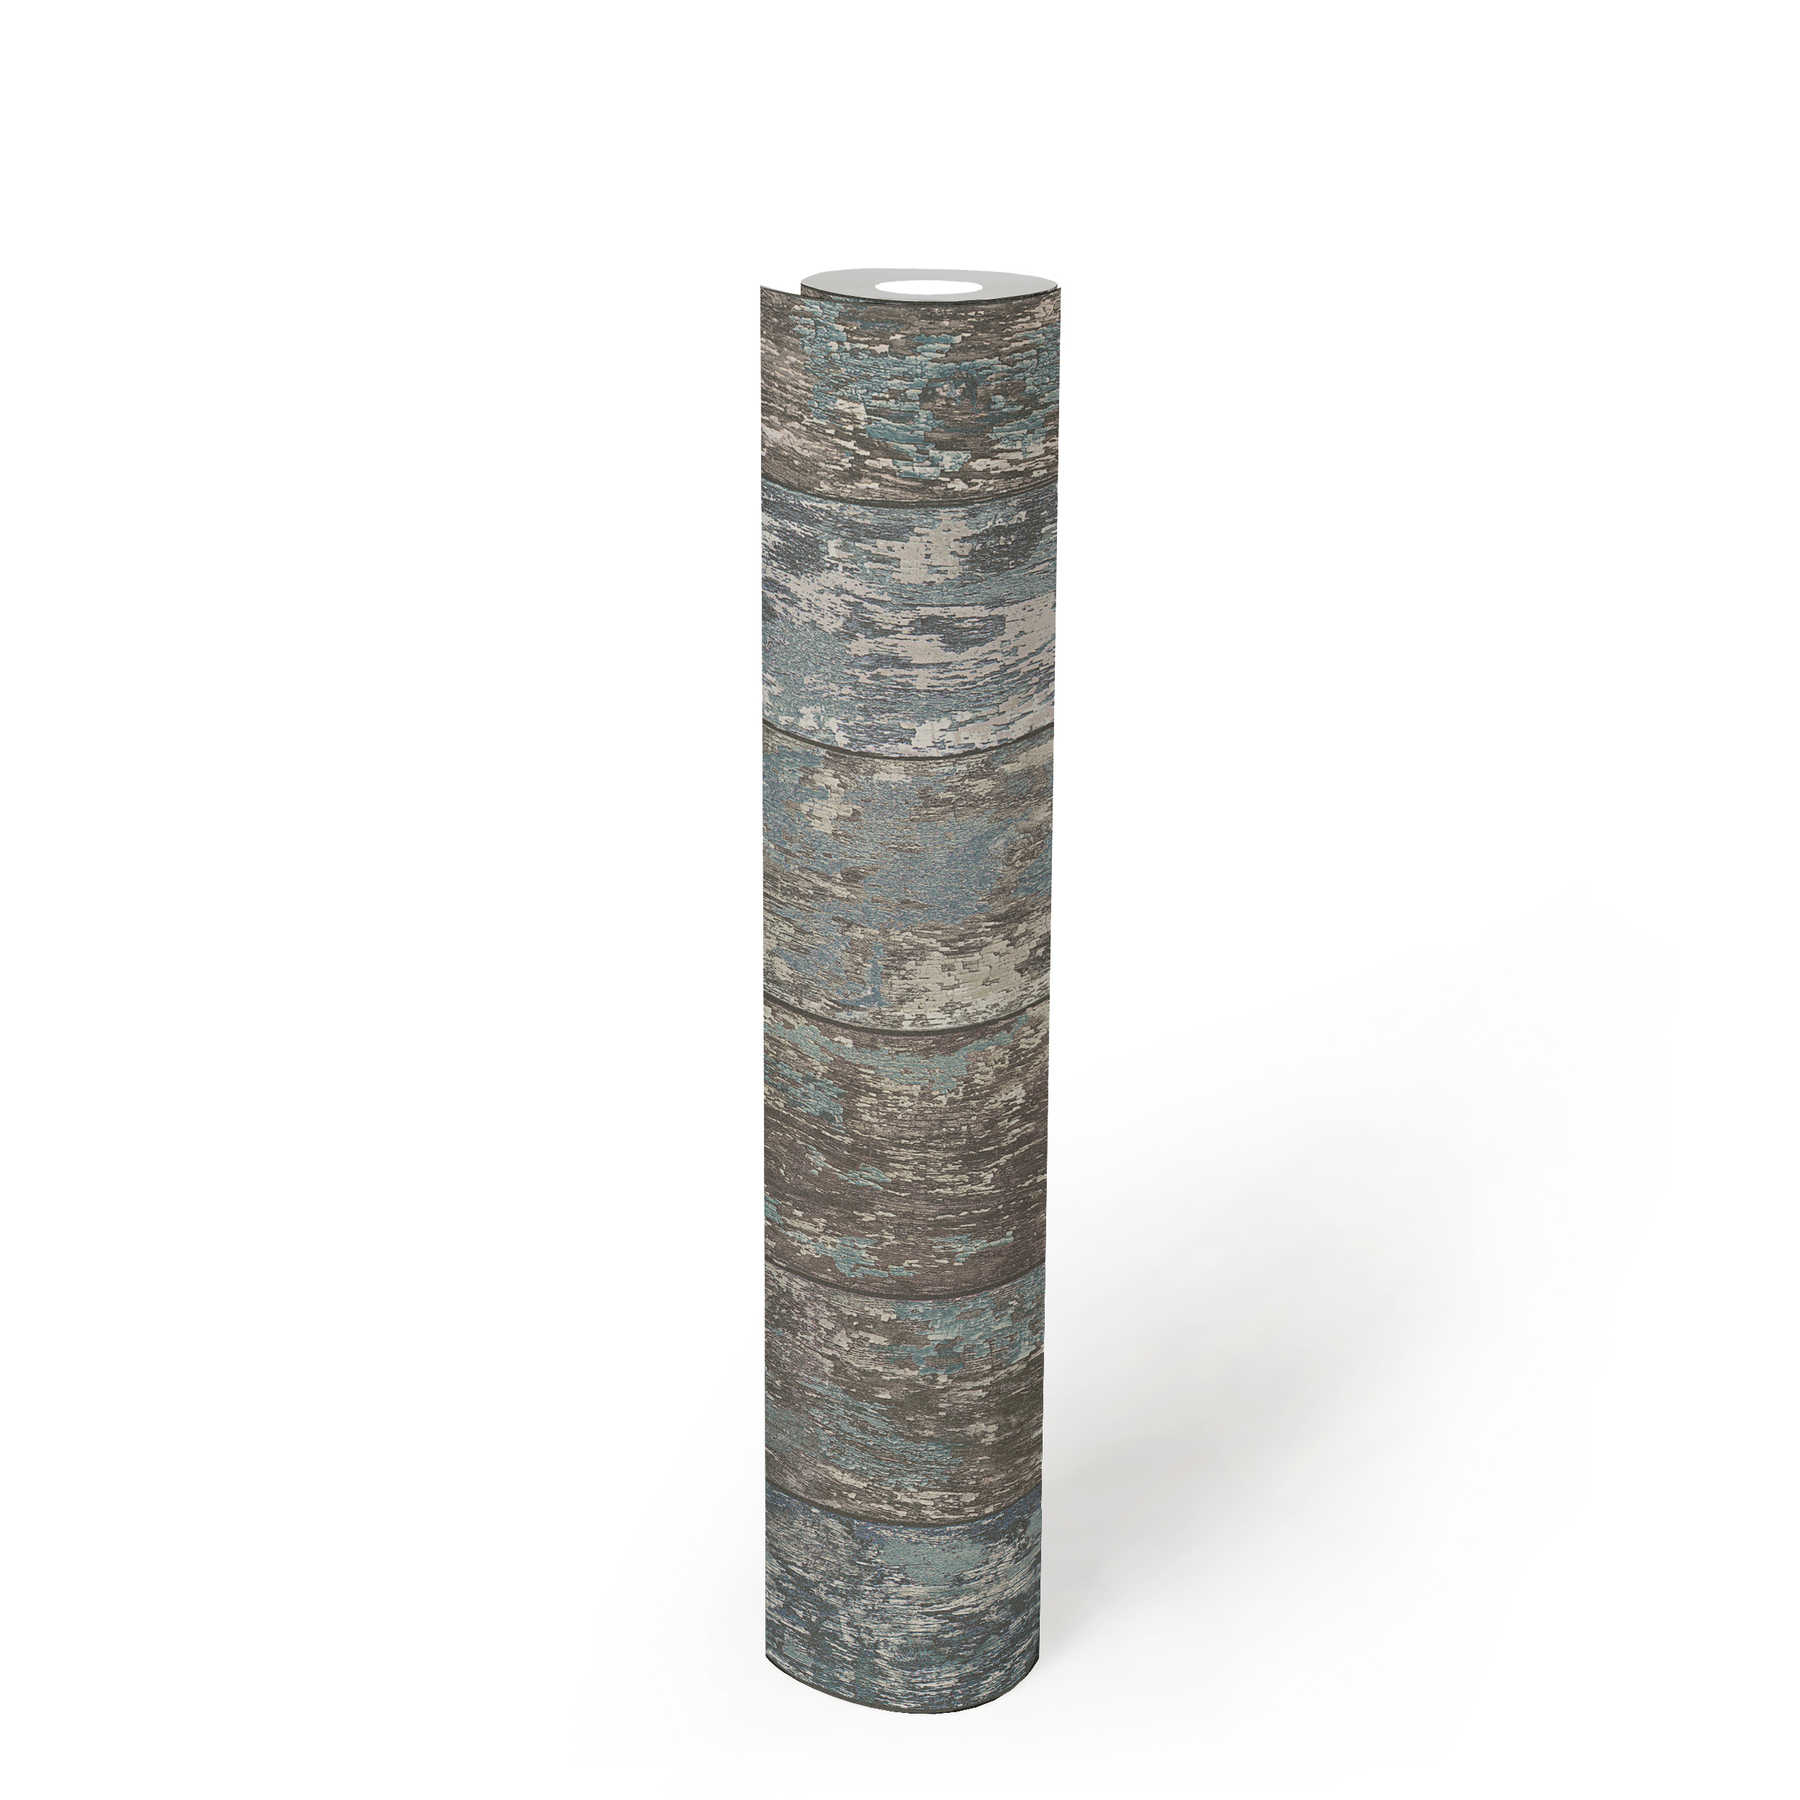             Wood effect non-woven wallpaper in shabby chic used look - blue, brown, grey
        